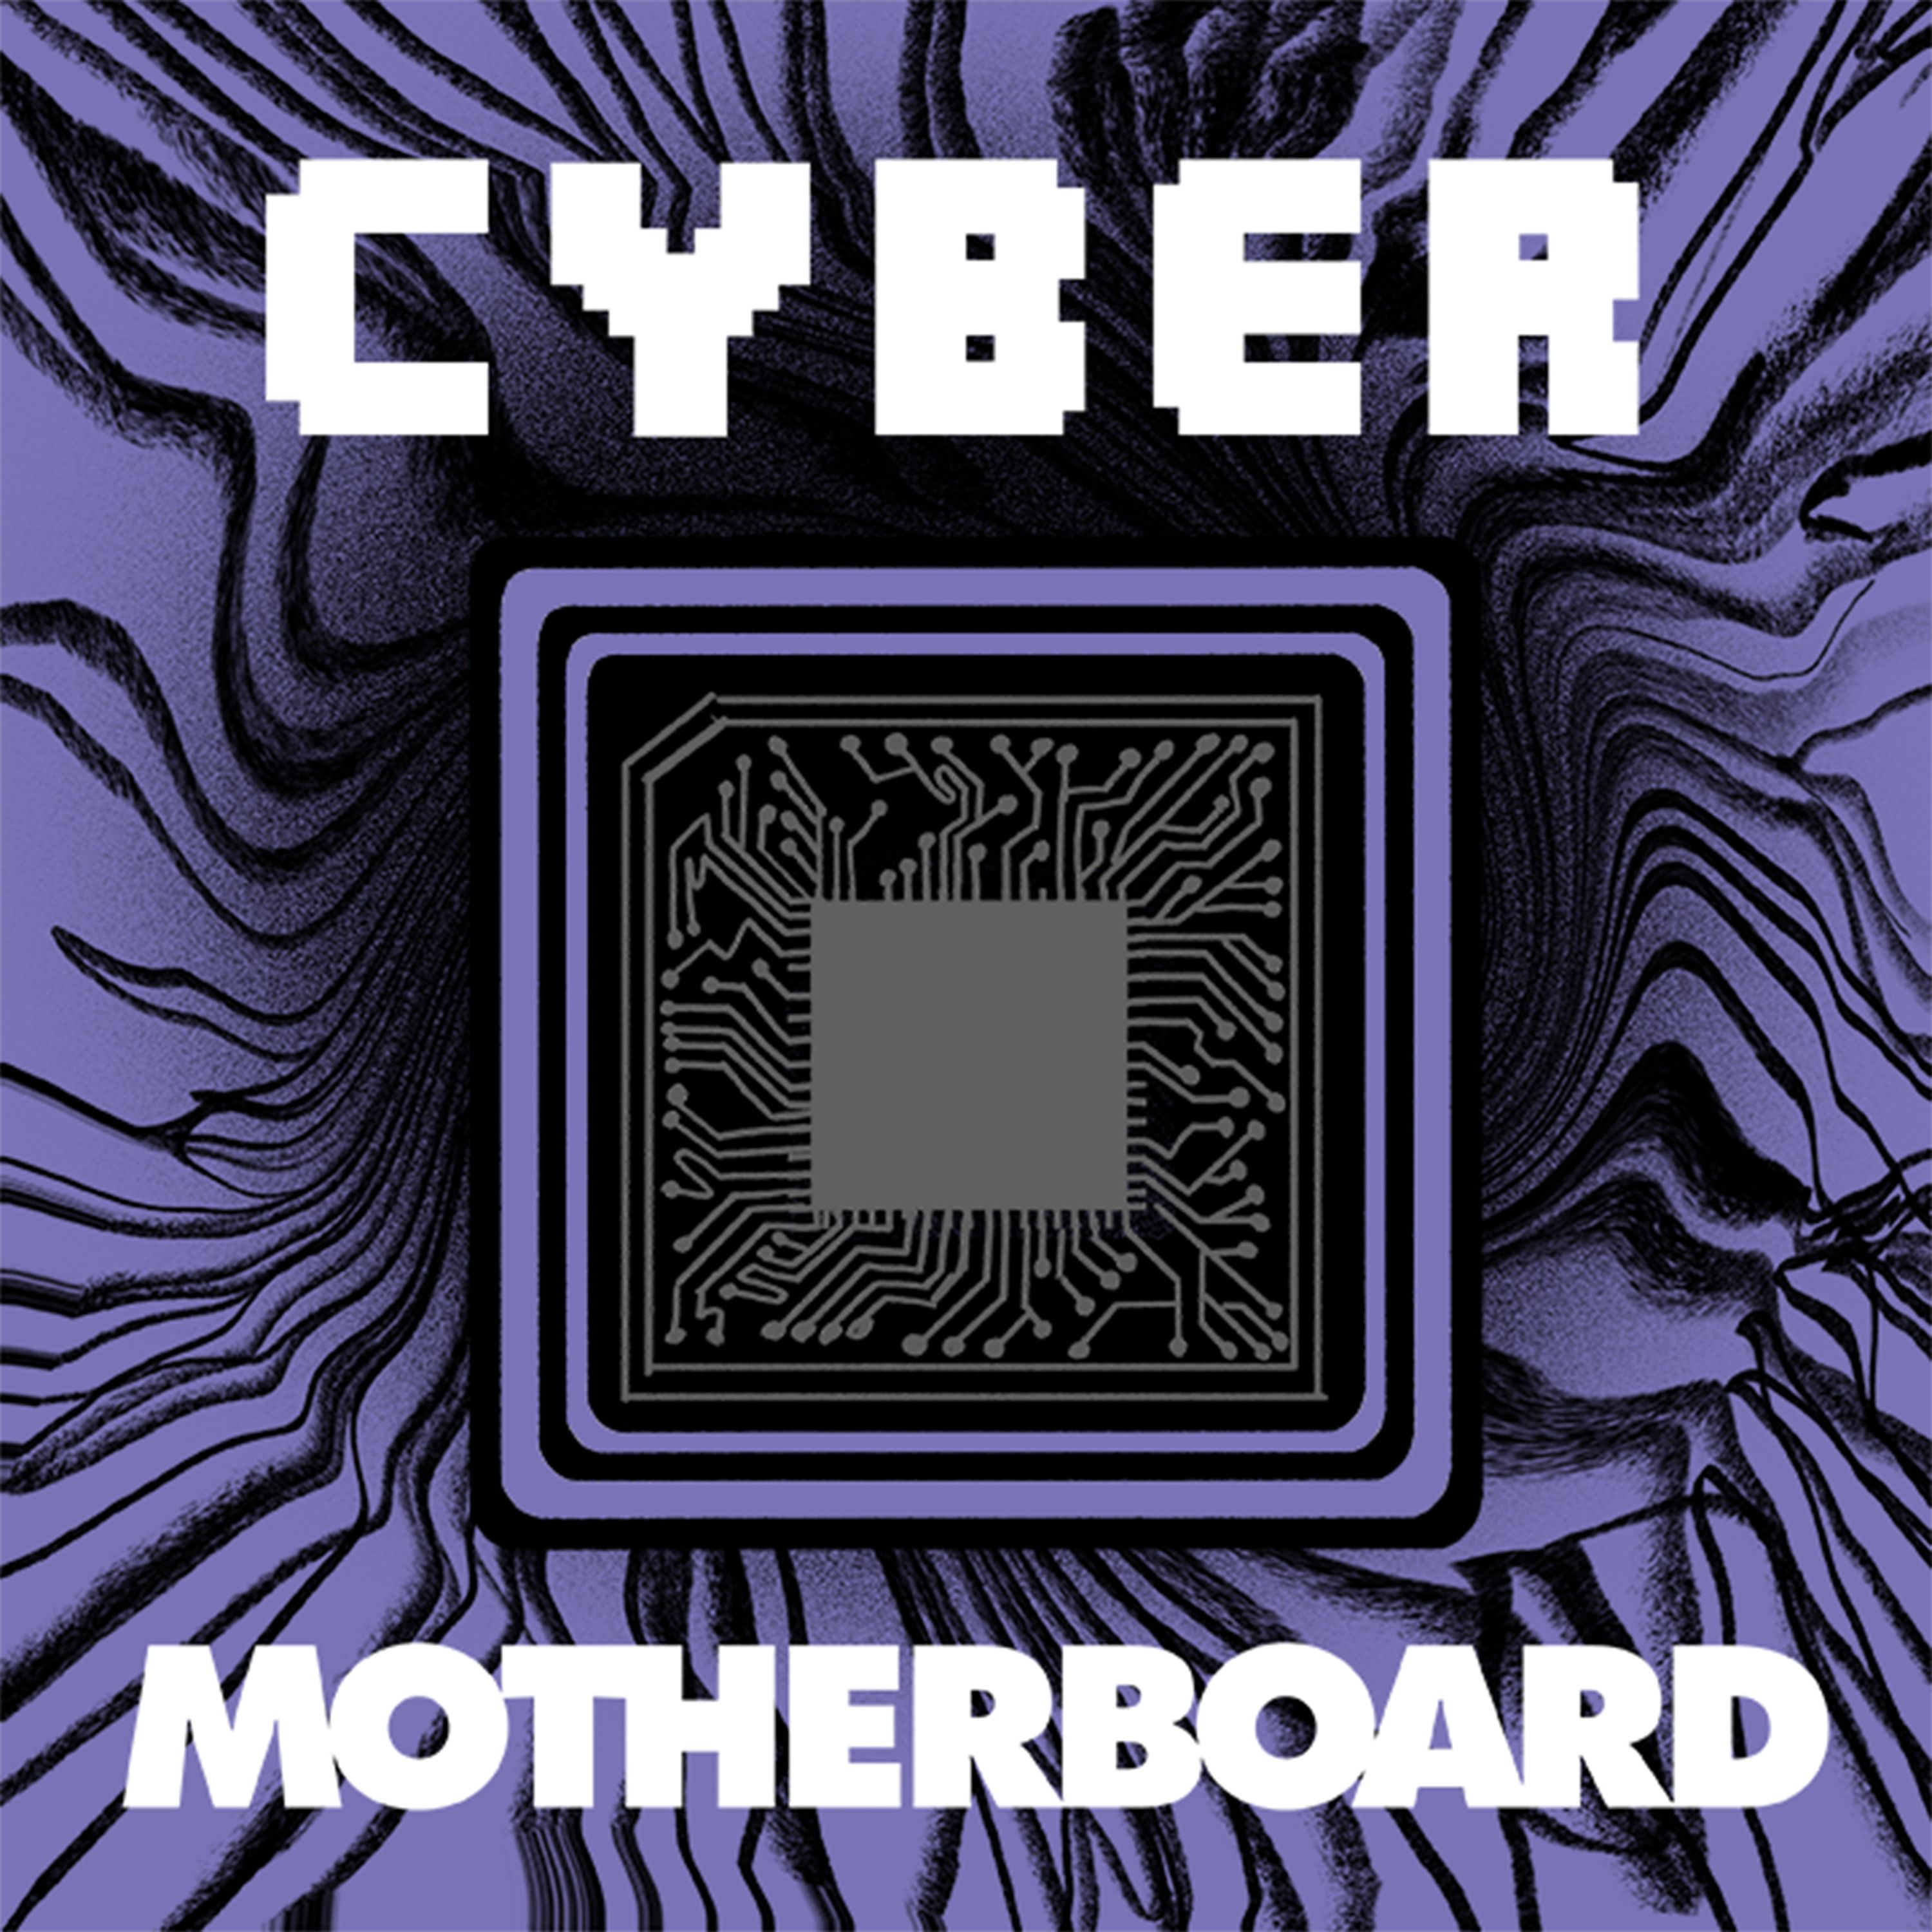 Have You Checked Out CYBER???